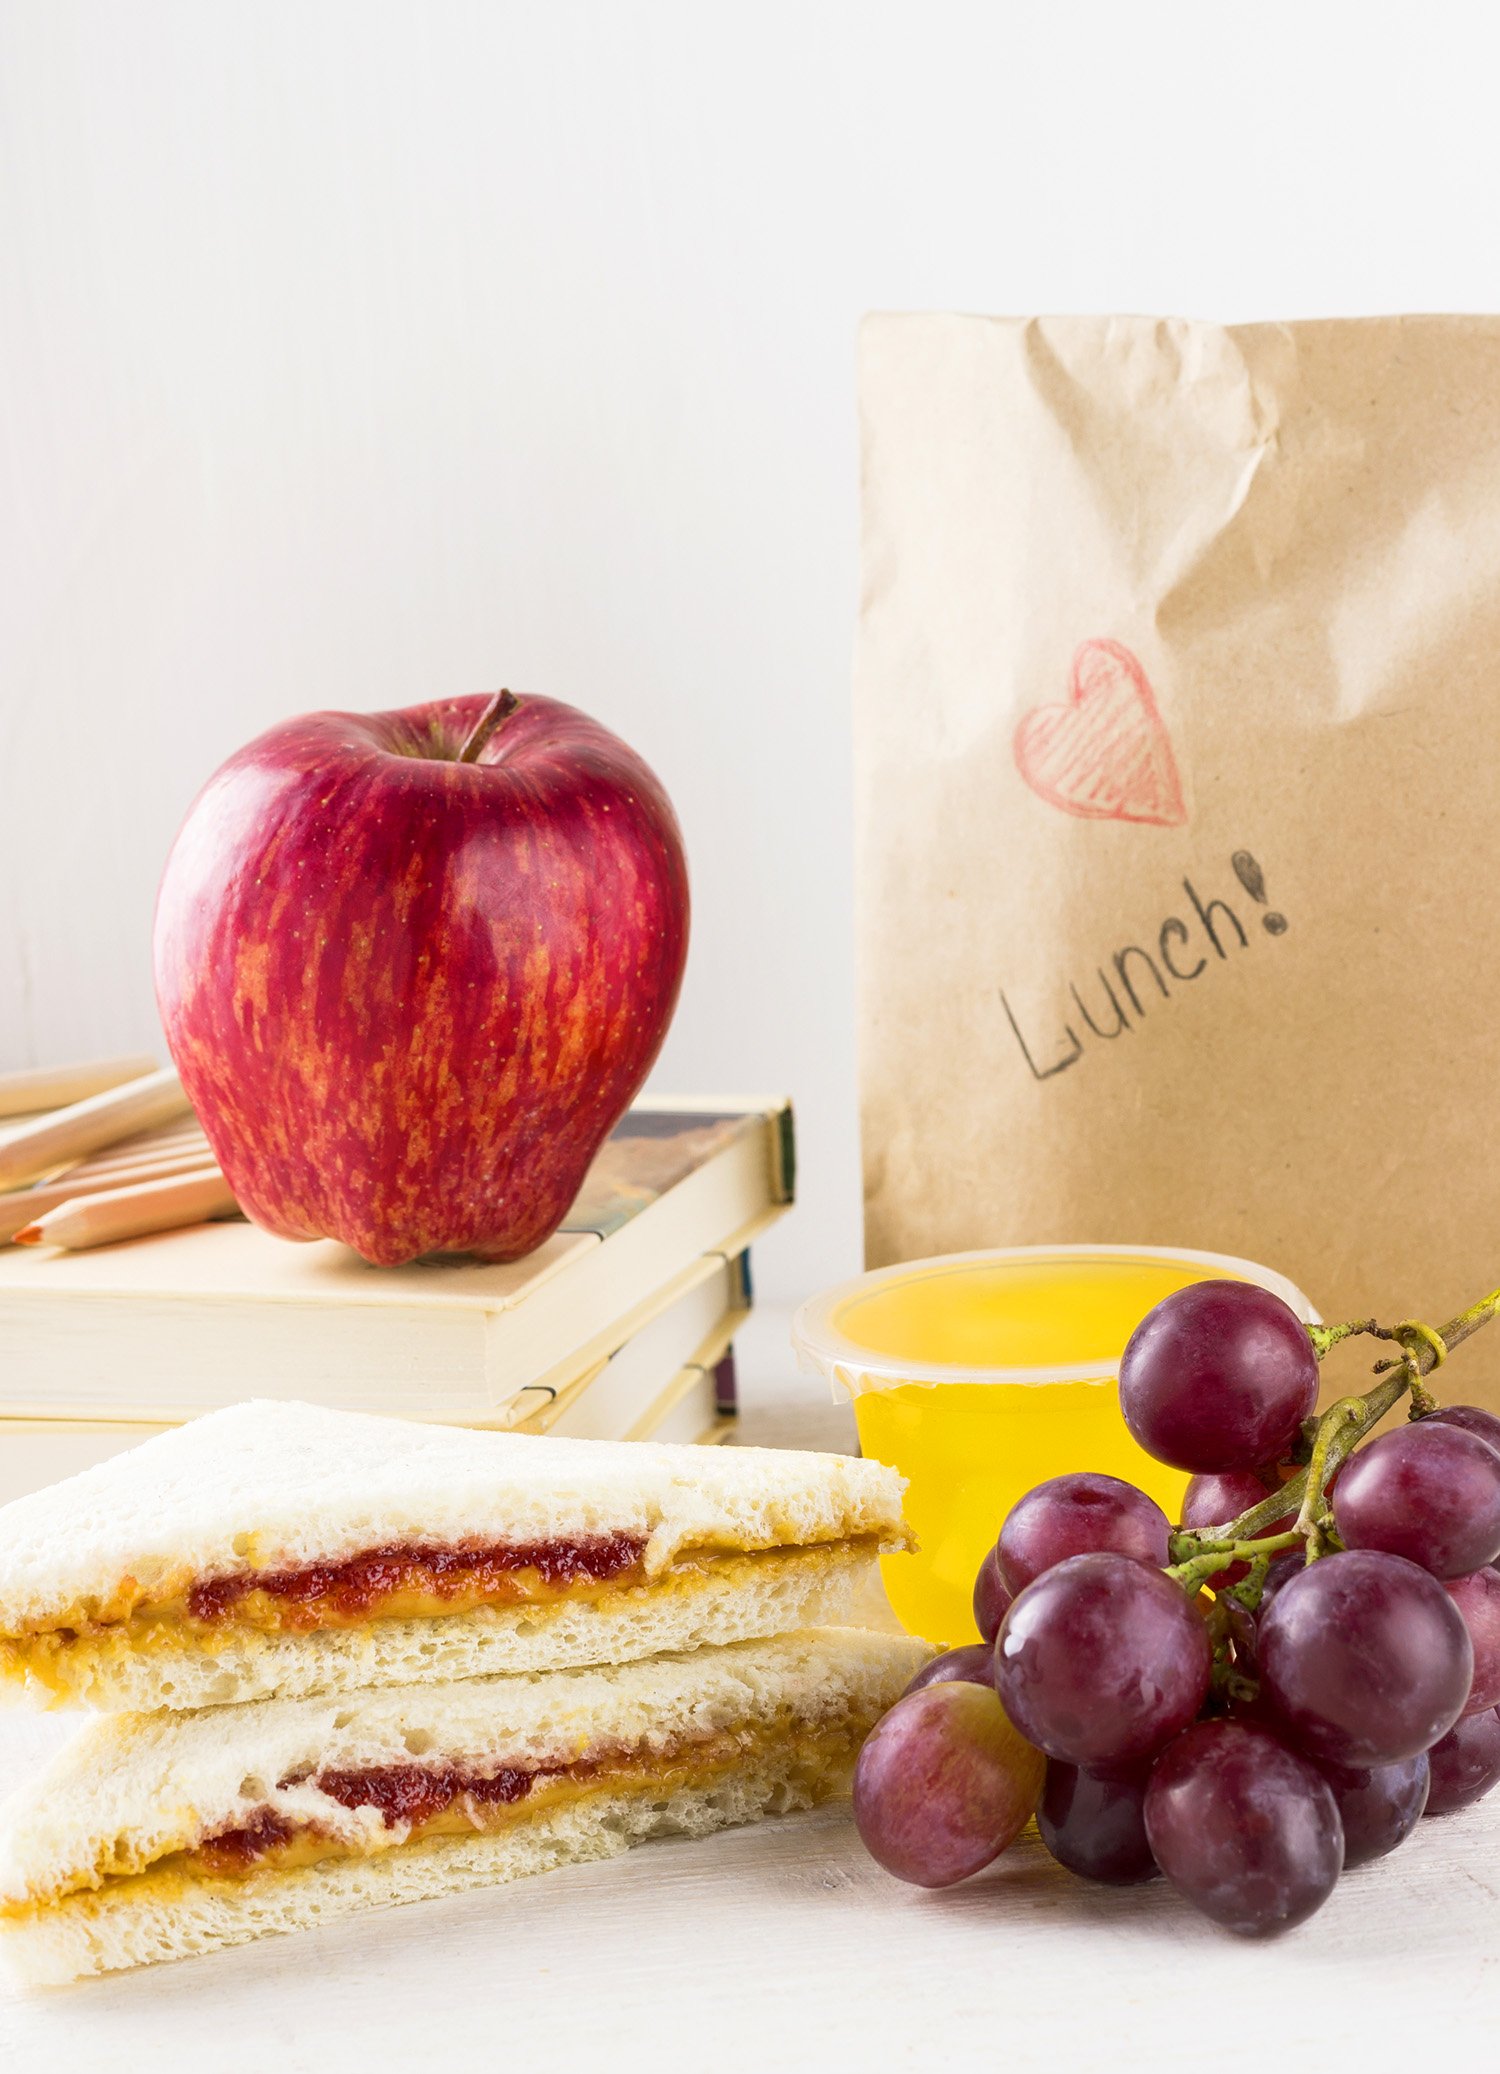 school lunch bag and lunch items